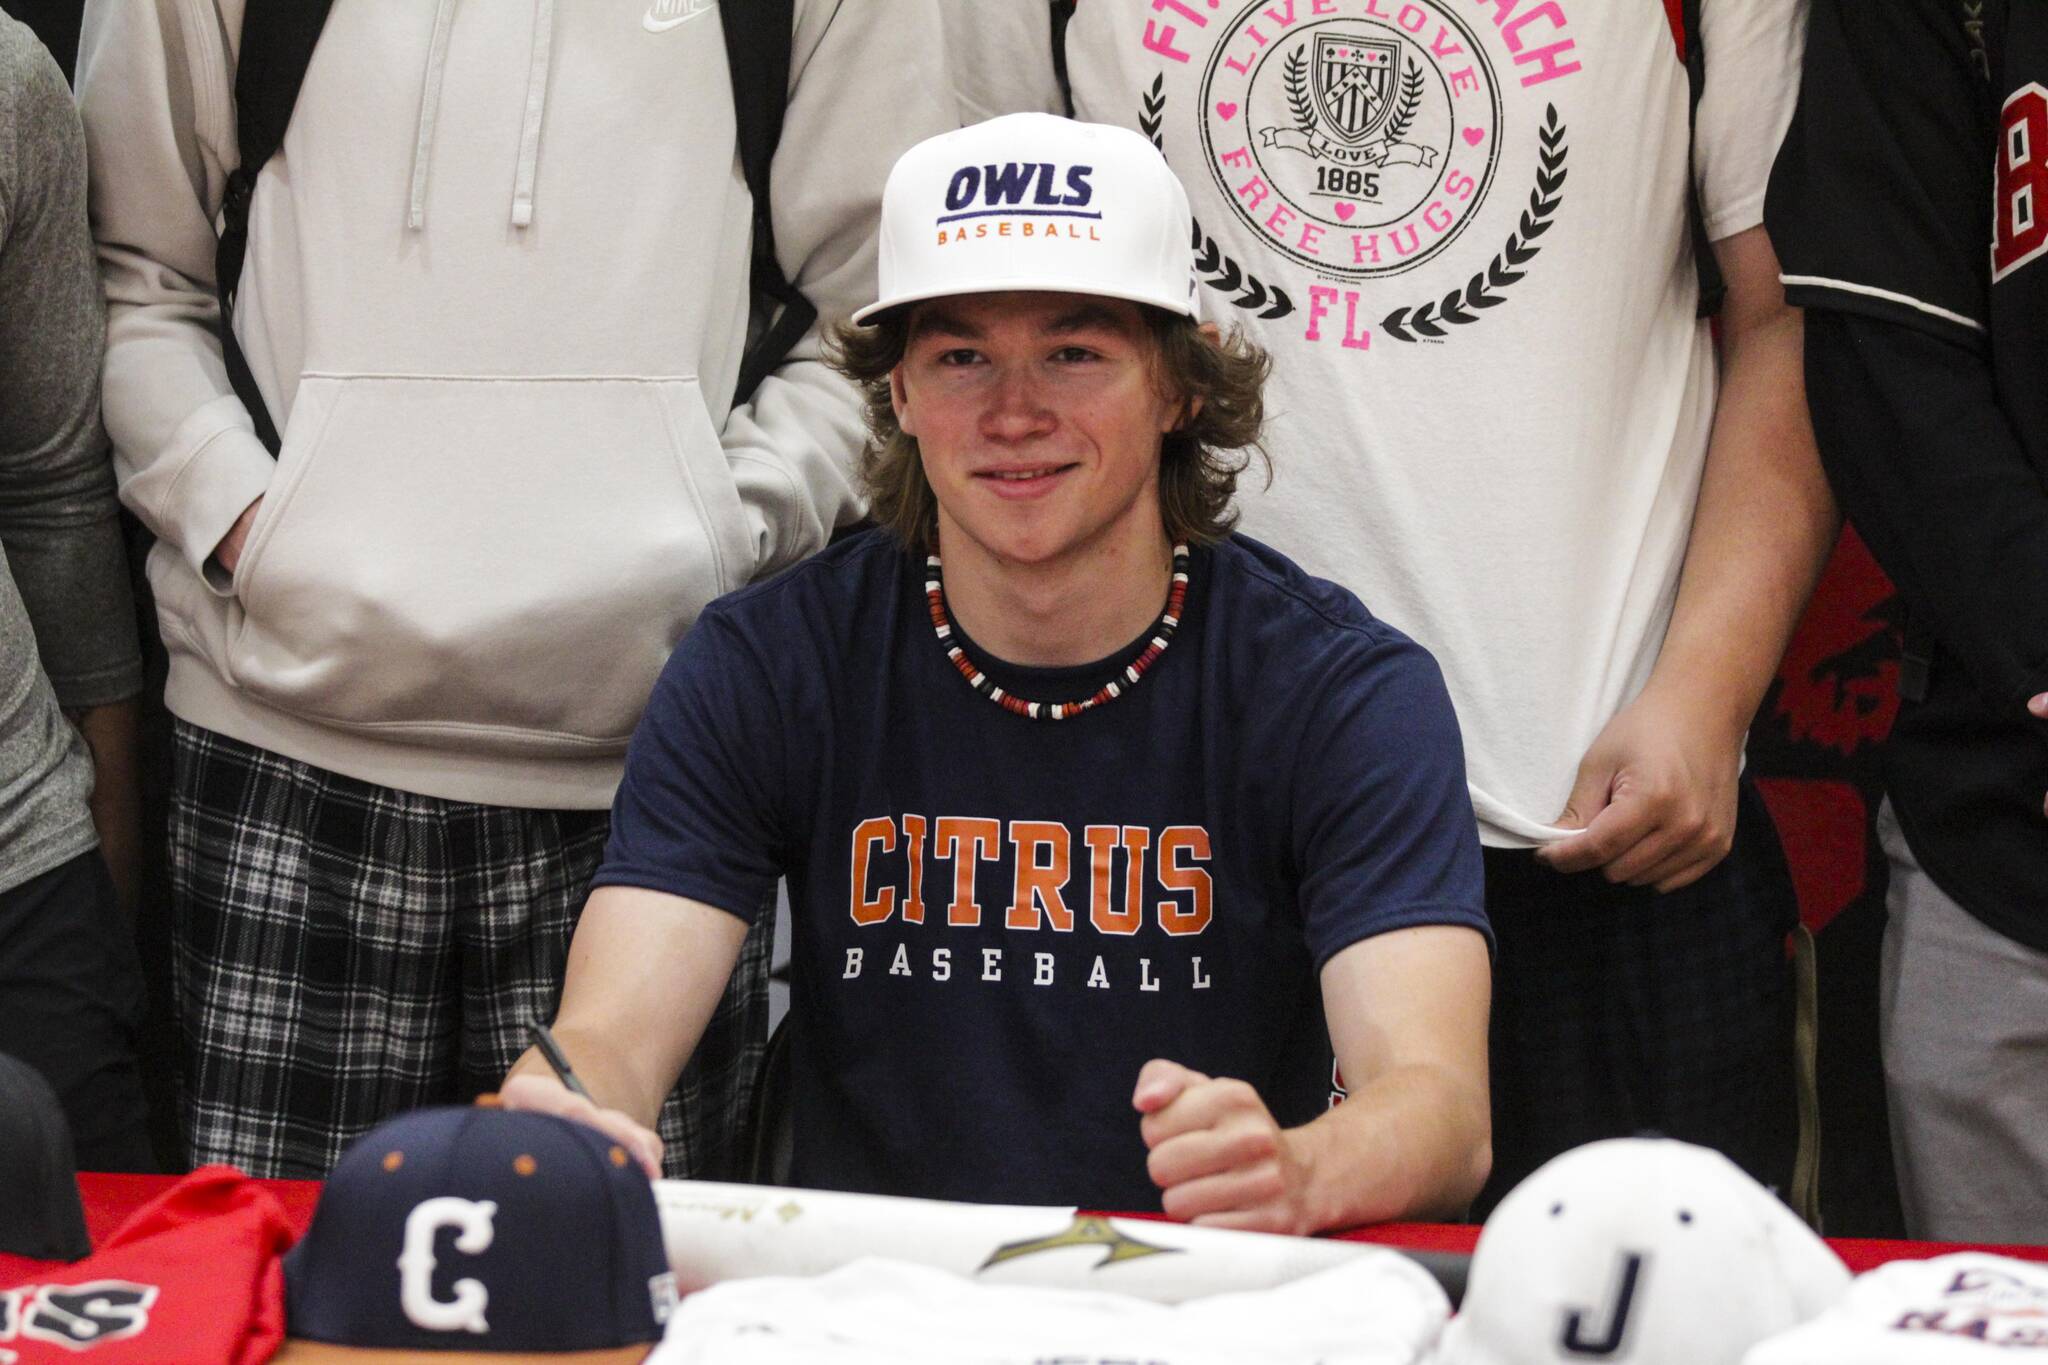 Porter Nelson, a senior at Juneau-Douglas High School: Yadaa.at Kalé, signed his letter of intent to play baseball for Citrus College, a community college located in Glendora, California, on May 24, 2022. “I was pretty stoked. I didn’t think they were going to answer my email,” said Nelson about the college extending the offer. “They’re the dream for me.” Nelson plays center fielder, and intends to study kinesiology, he said. (Michael S. Lockett / Juneau Empire)